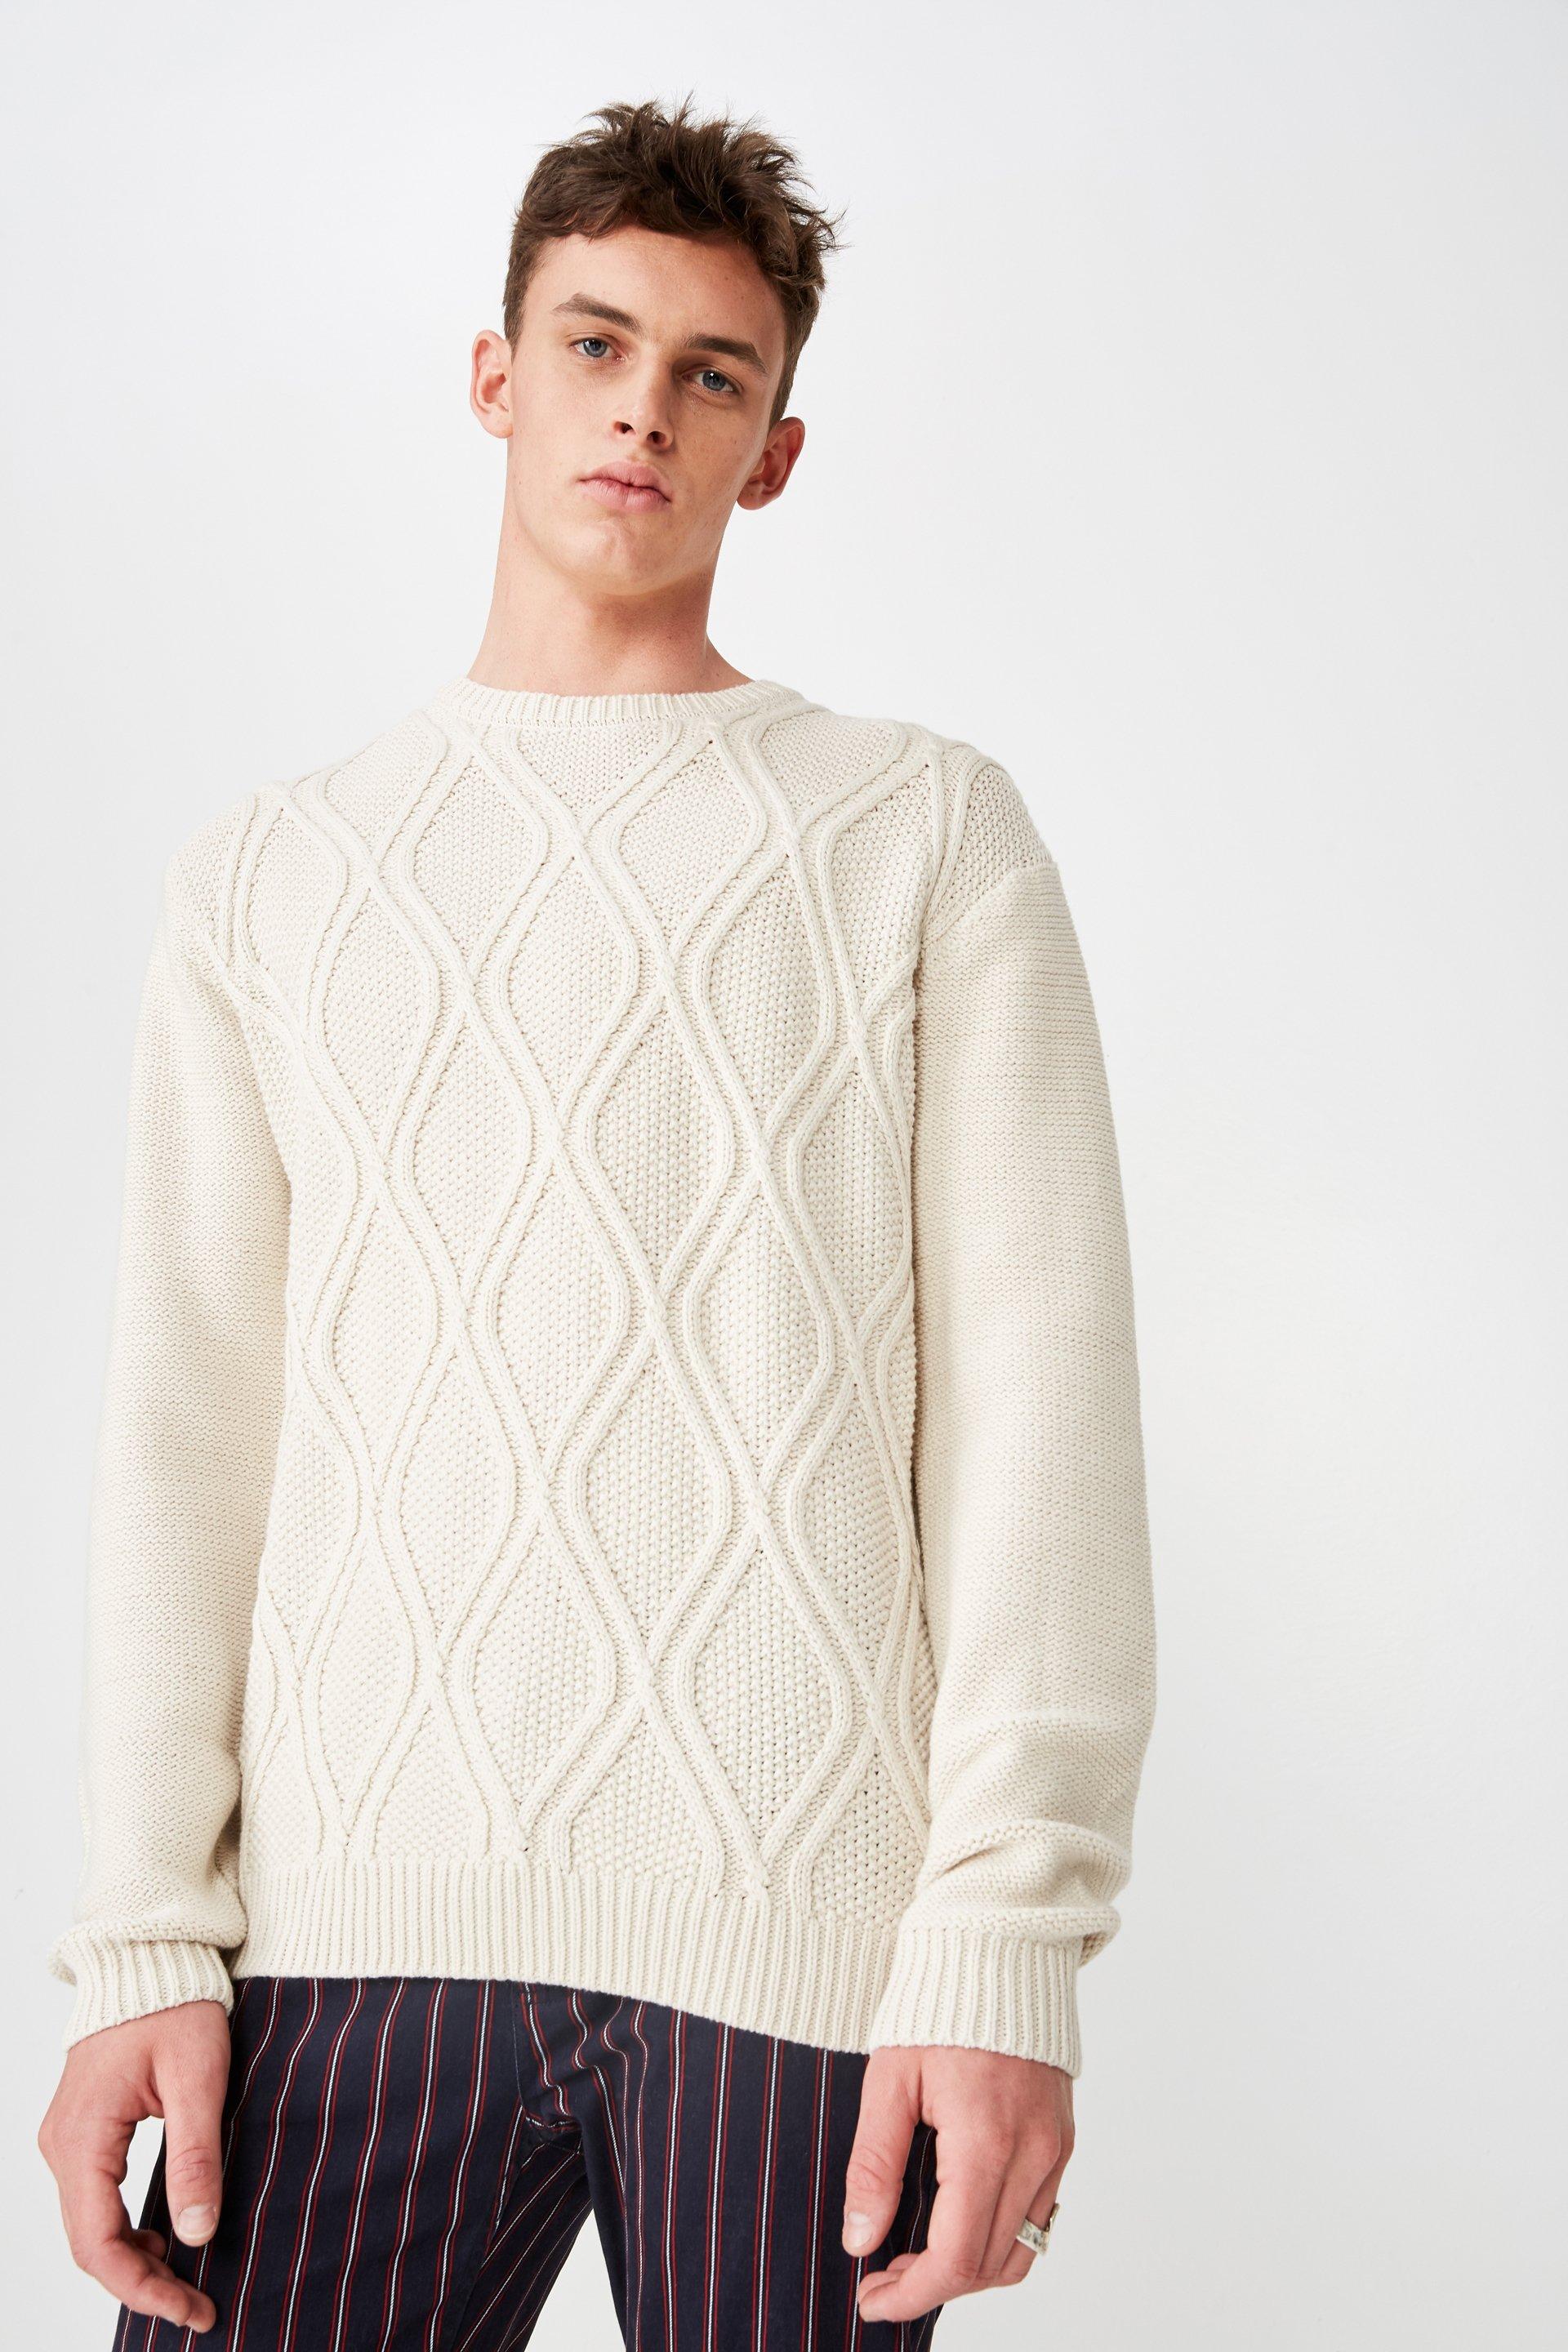 Cable knit sweater - ivory Cotton On Knitwear | Superbalist.com